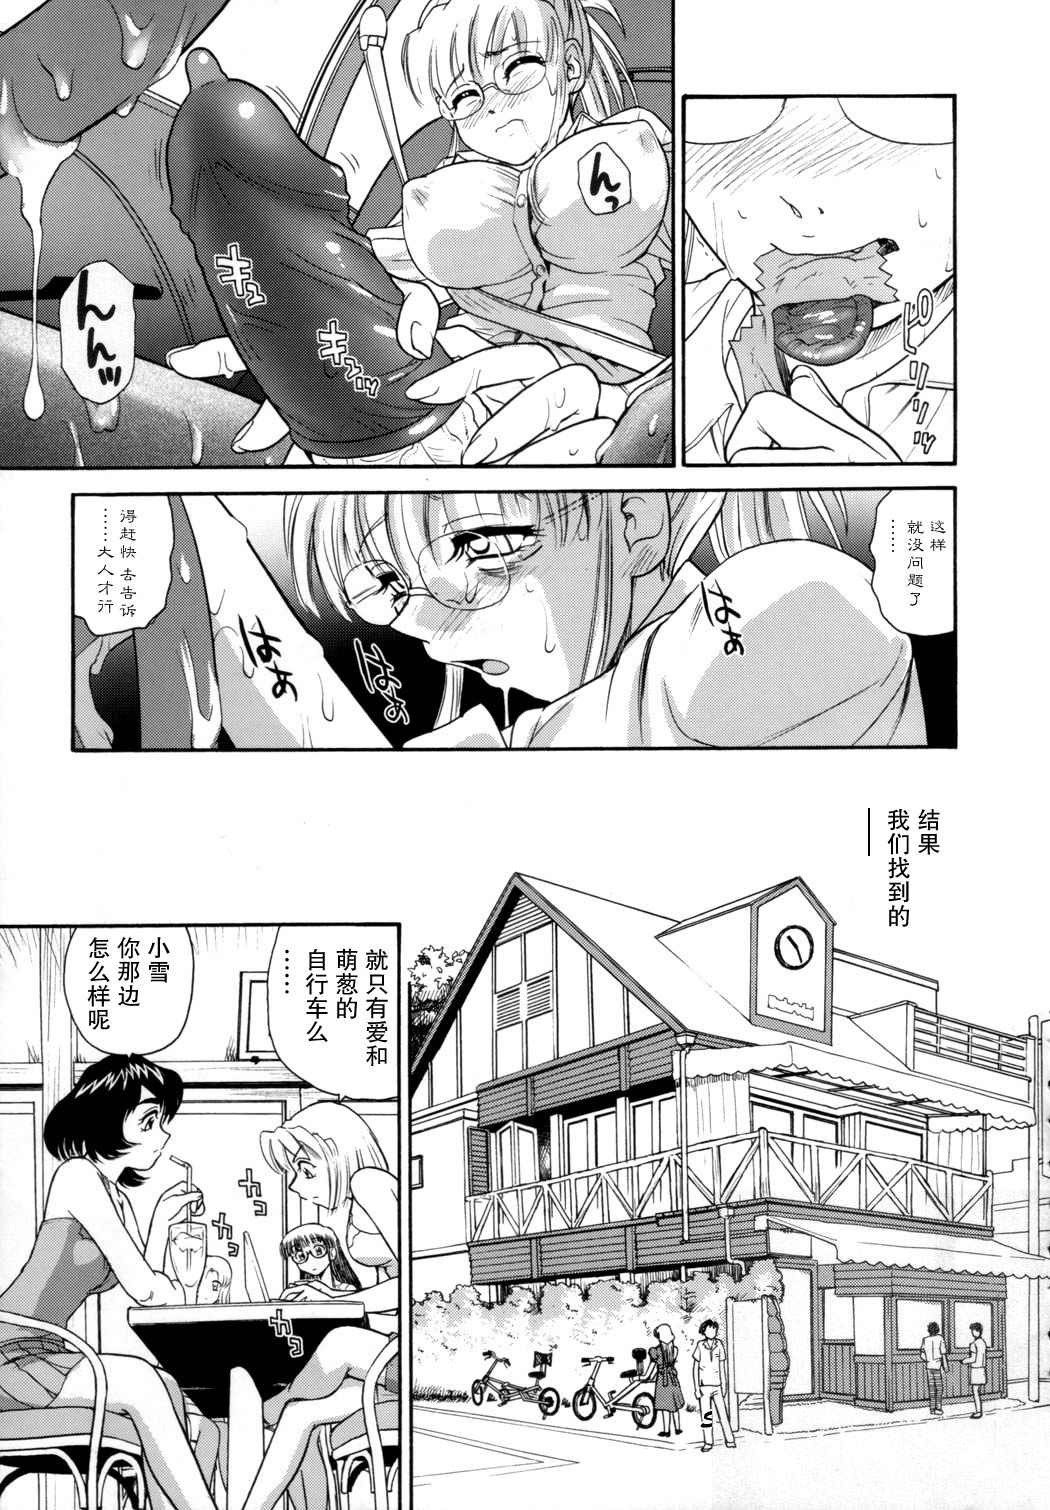 (C72) [Behind Moon (Q)] Dulce Report 9 | 达西报告 9 [Chinese] [哈尼喵汉化组] [Decensored] page 7 full